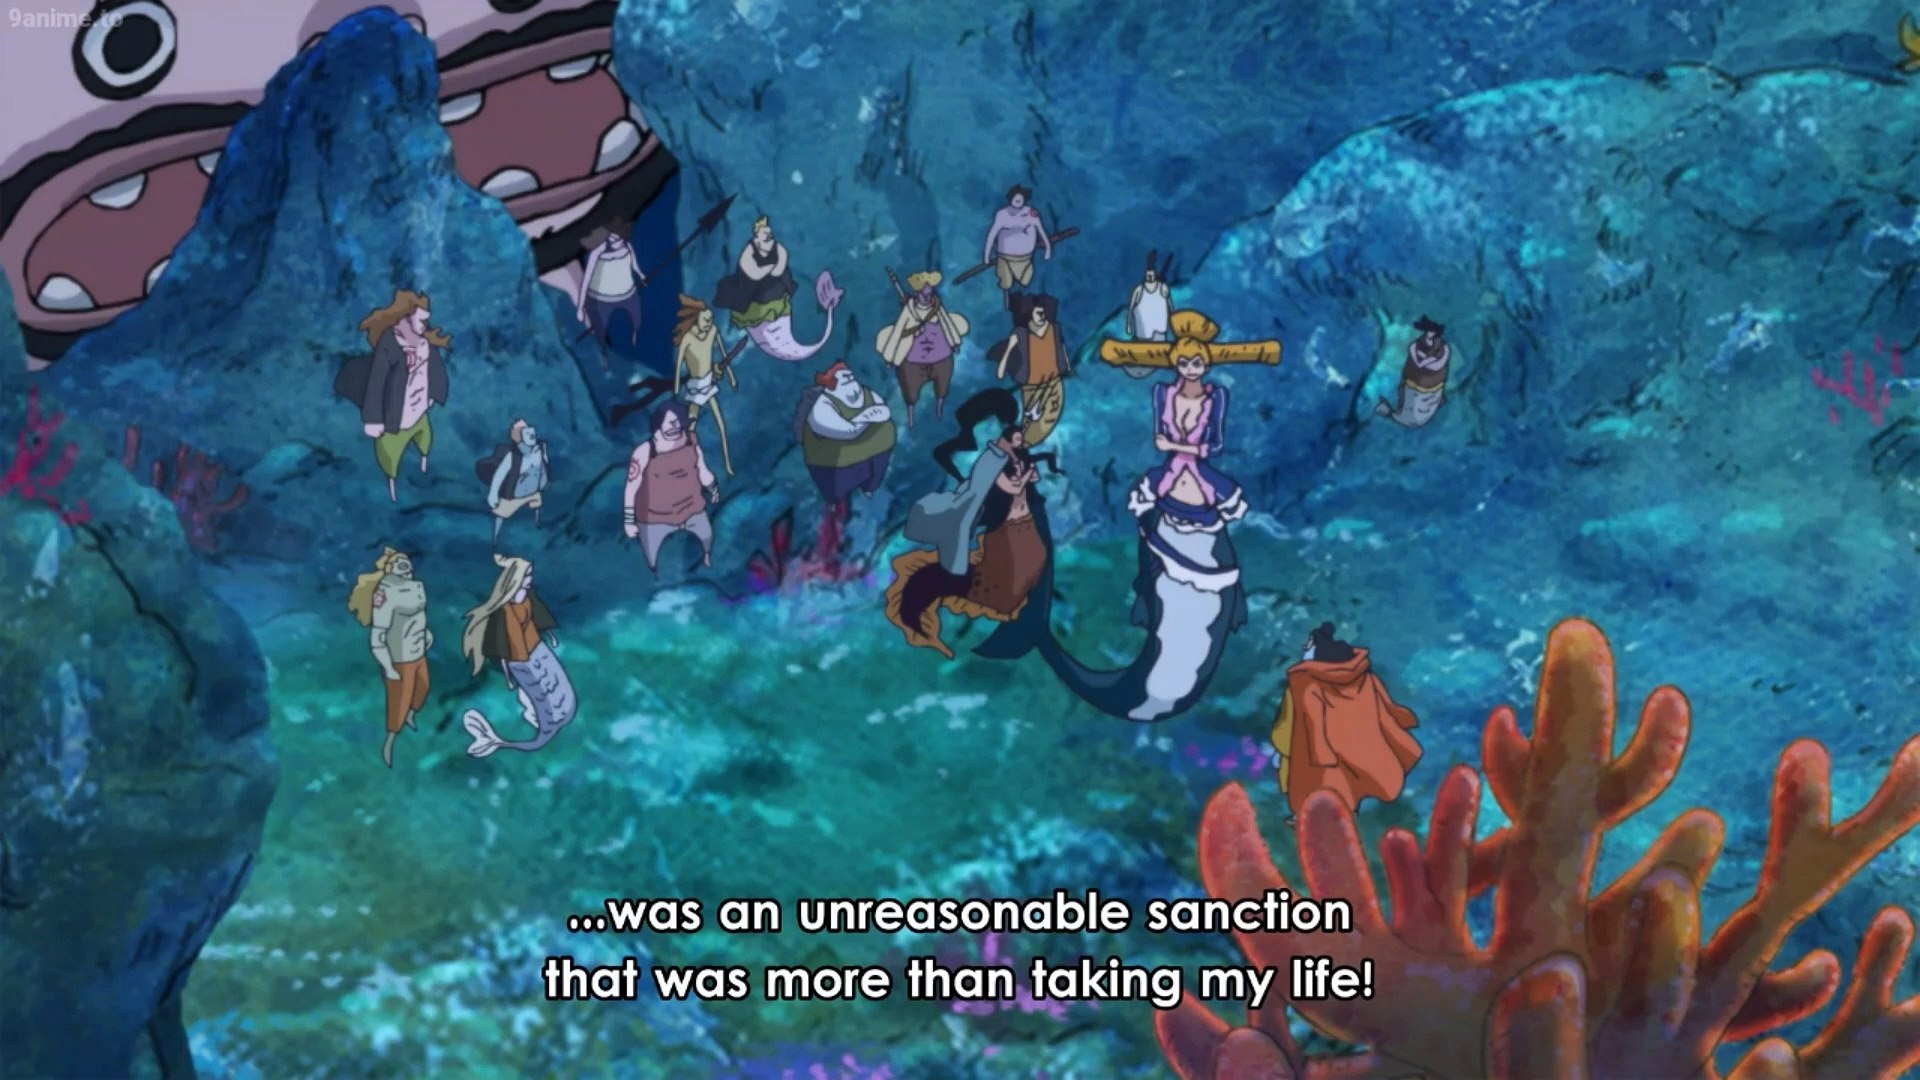 One Piece Jinbei Meets Up With His Pirate Crew To Declare That He Images, Photos, Reviews